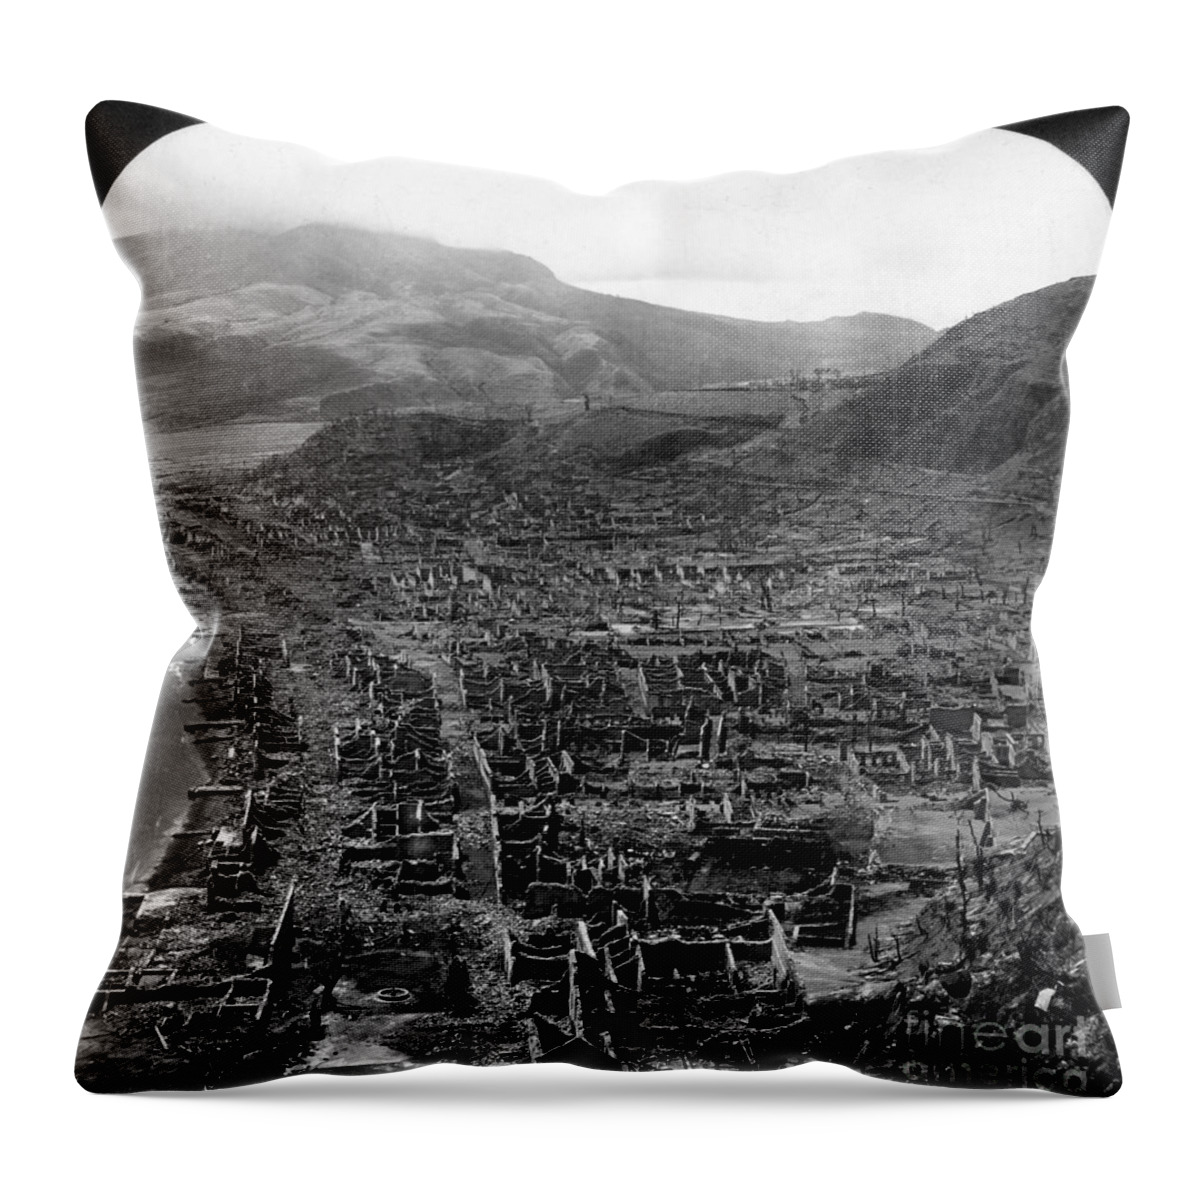 1902 Throw Pillow featuring the photograph Volcano: Mount Pelee, 1902 by Granger